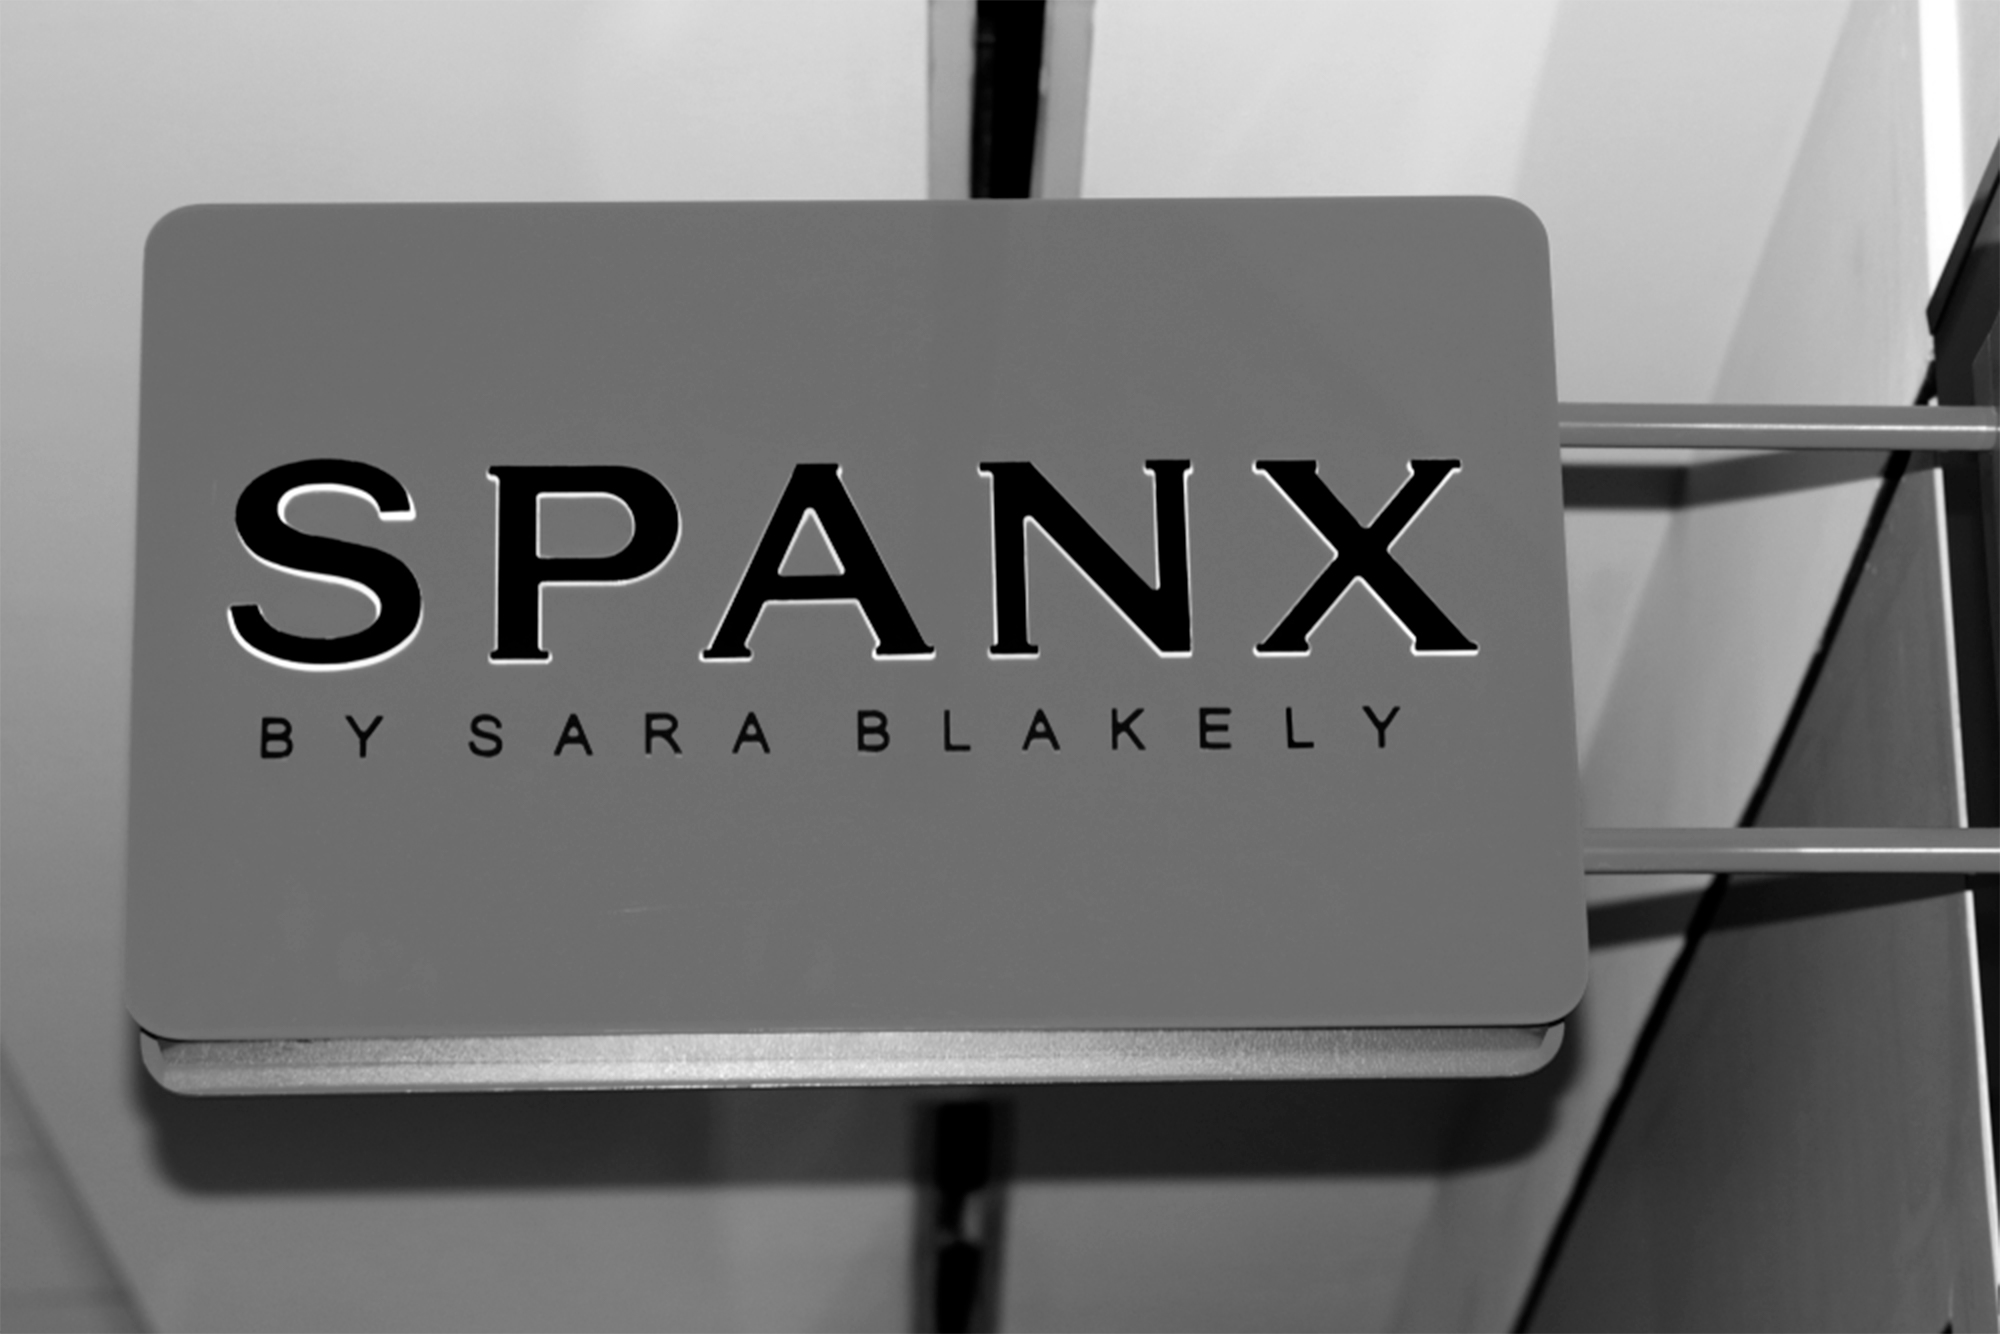 Sara Blakely on founding SPANX, smarter thinking and taking risks